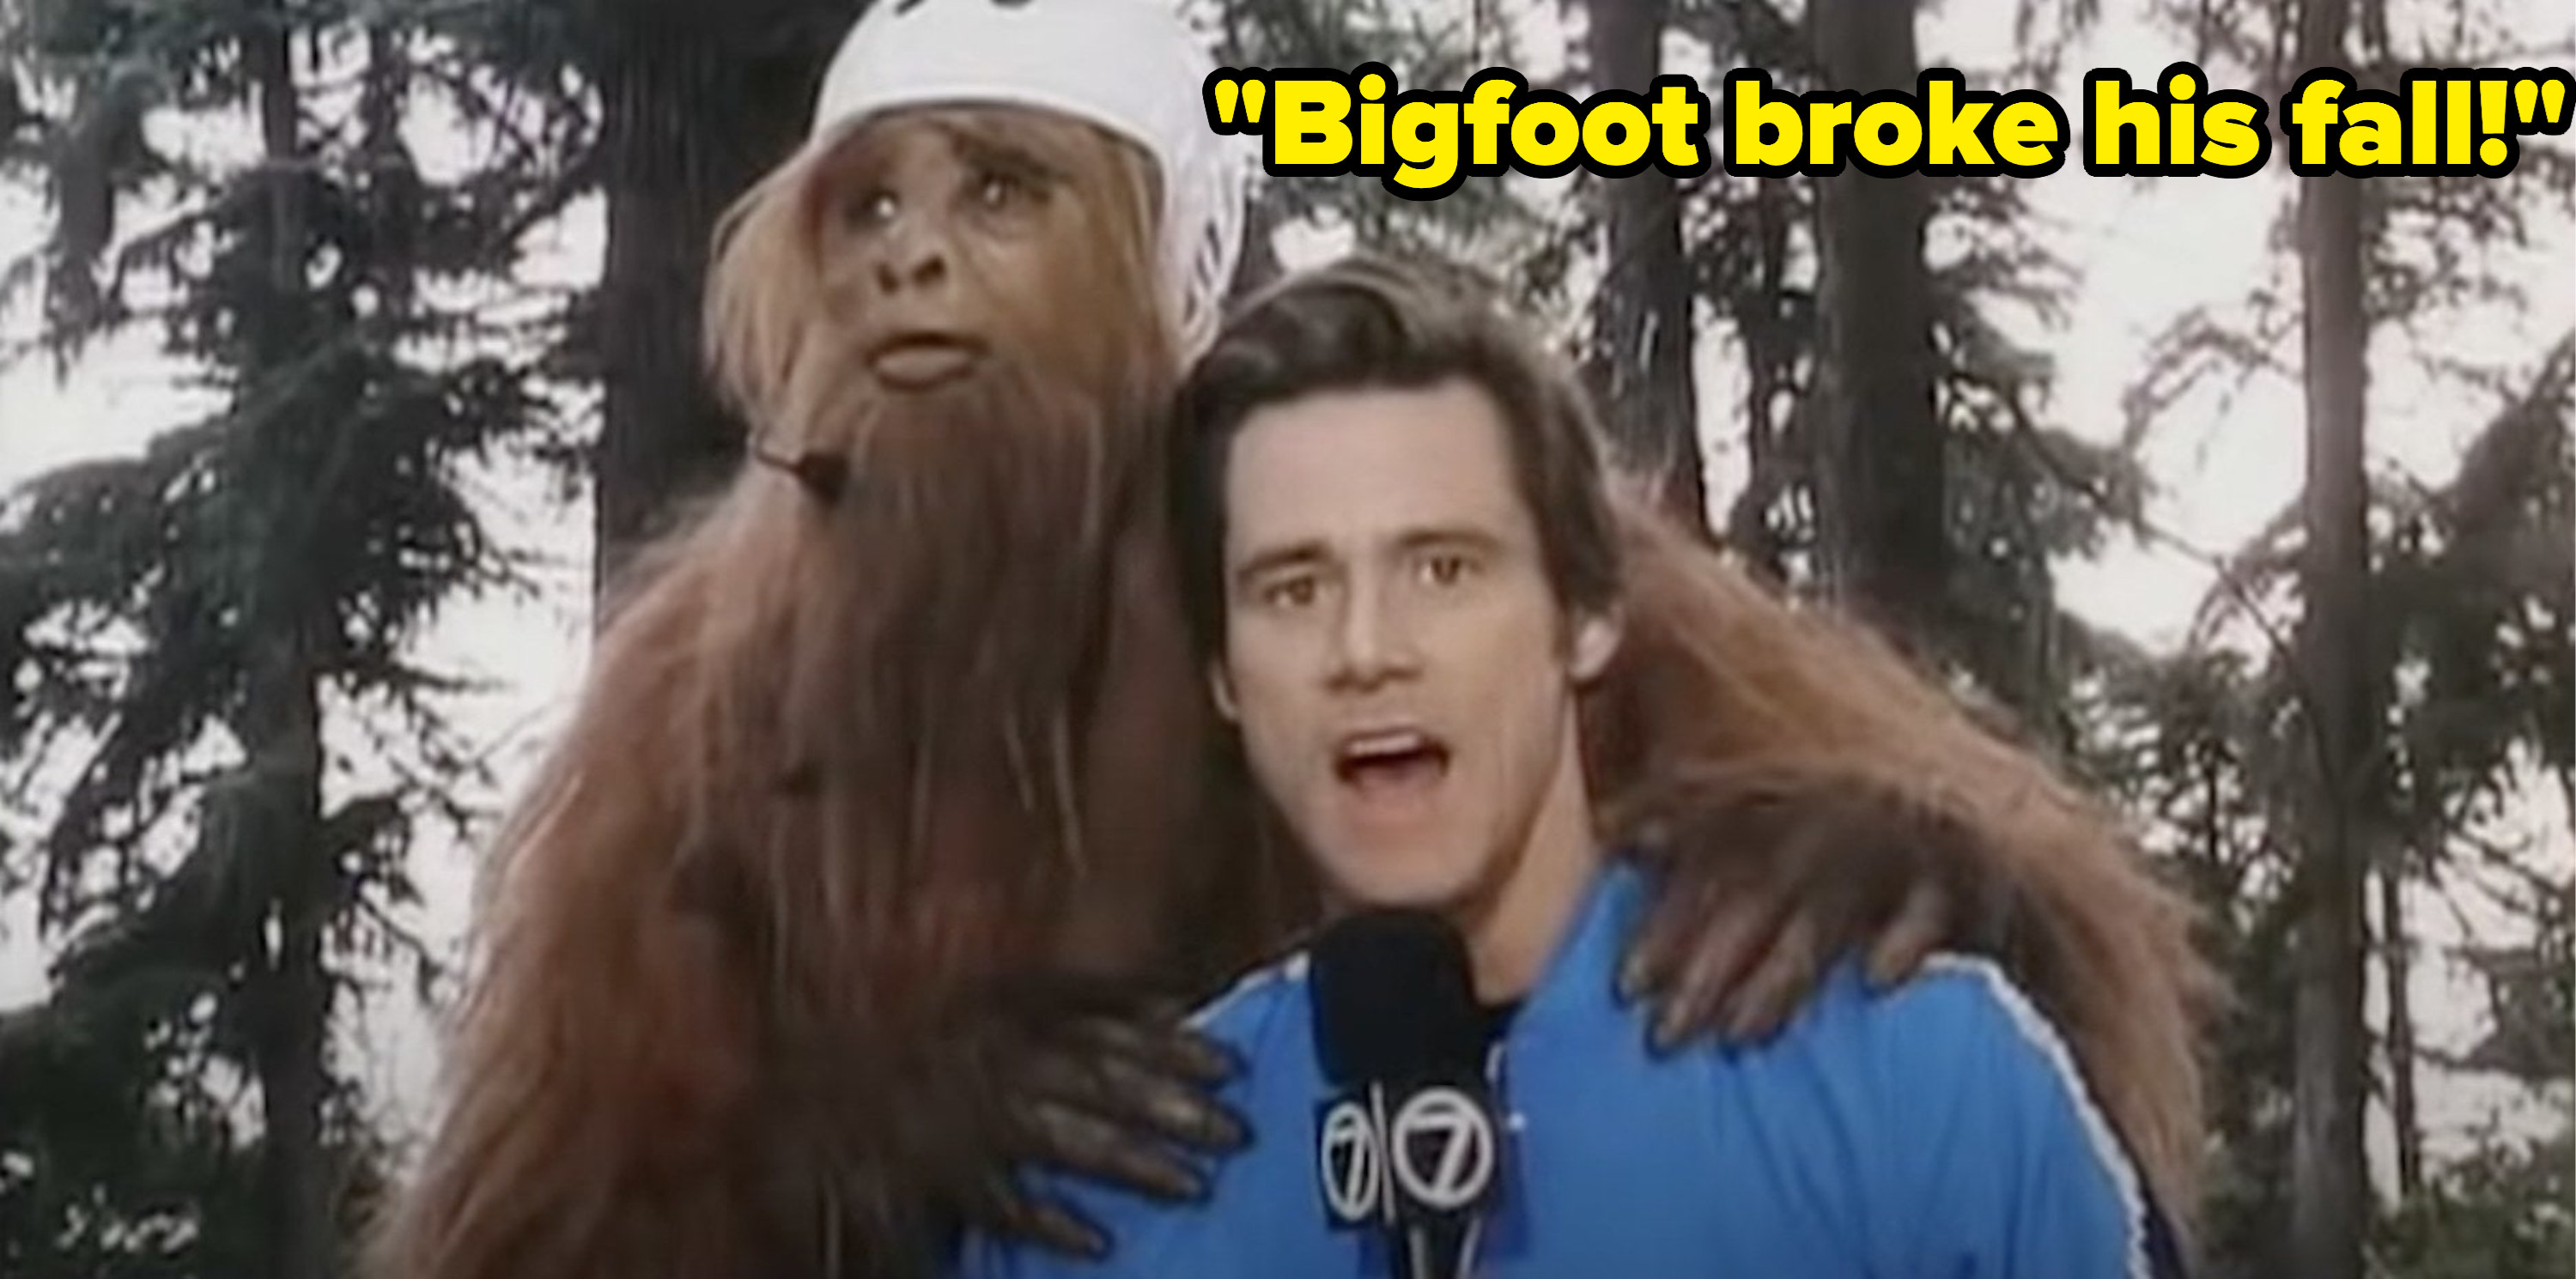 Bruce does a report next to bigfoot